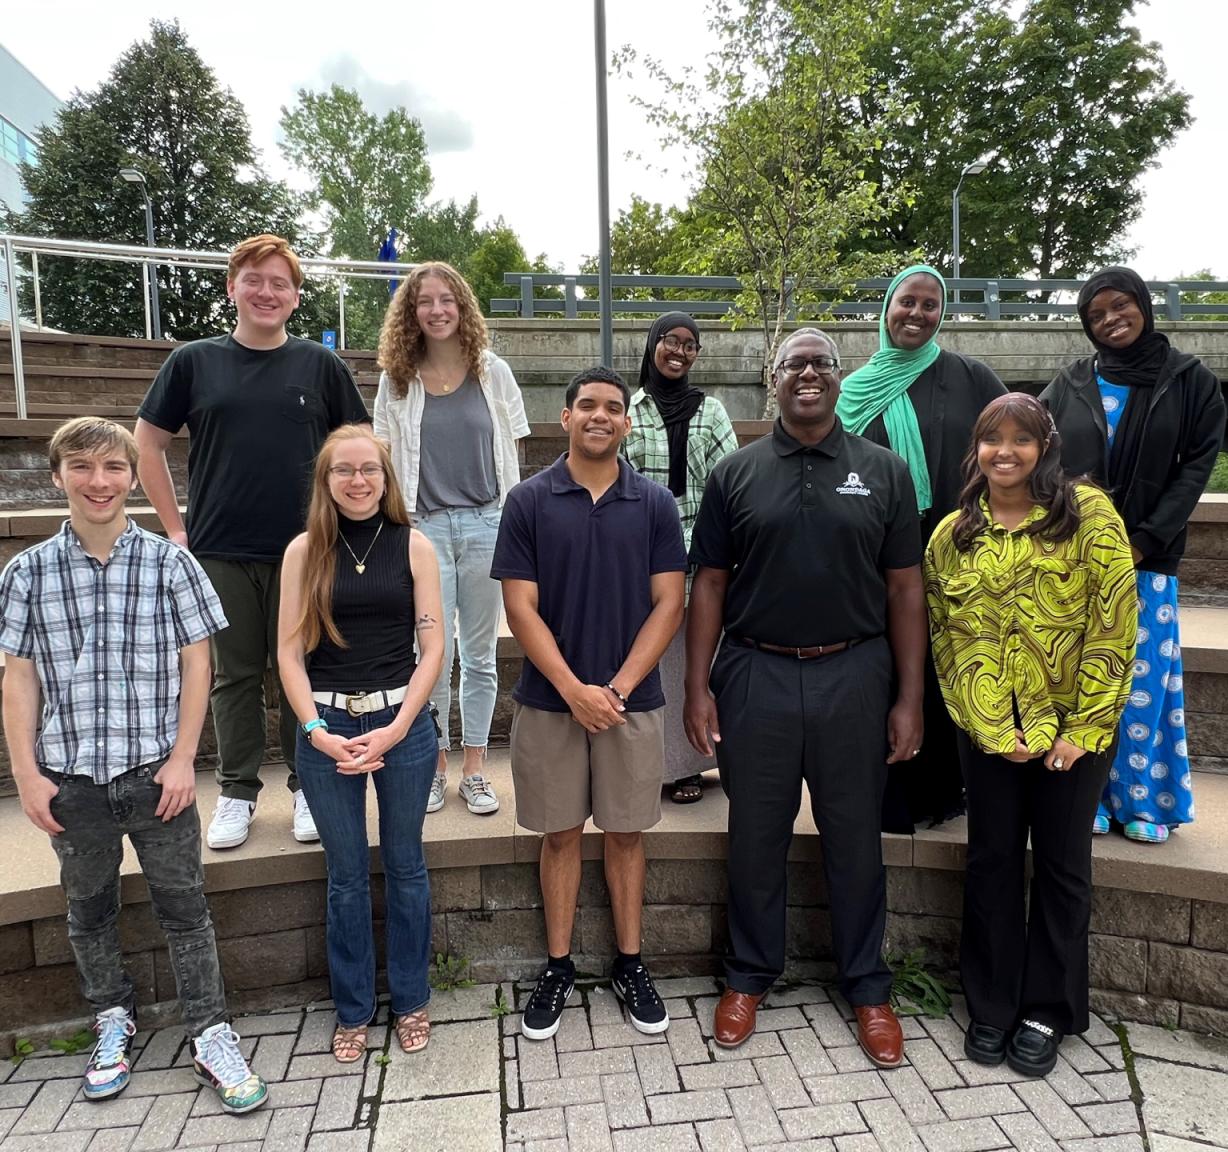 Student Government Officers (front row, left to right) Darian Barber, Siobhan Young, Chris Cedano Alcala, OCC President Dr. Warren Hilton, and Thuw J-Elmi. Back row (left to right): Eddie Flynn, Hannah Durand, Sabirin Hassan, Yasmin Hassan, Zaineb Aden.